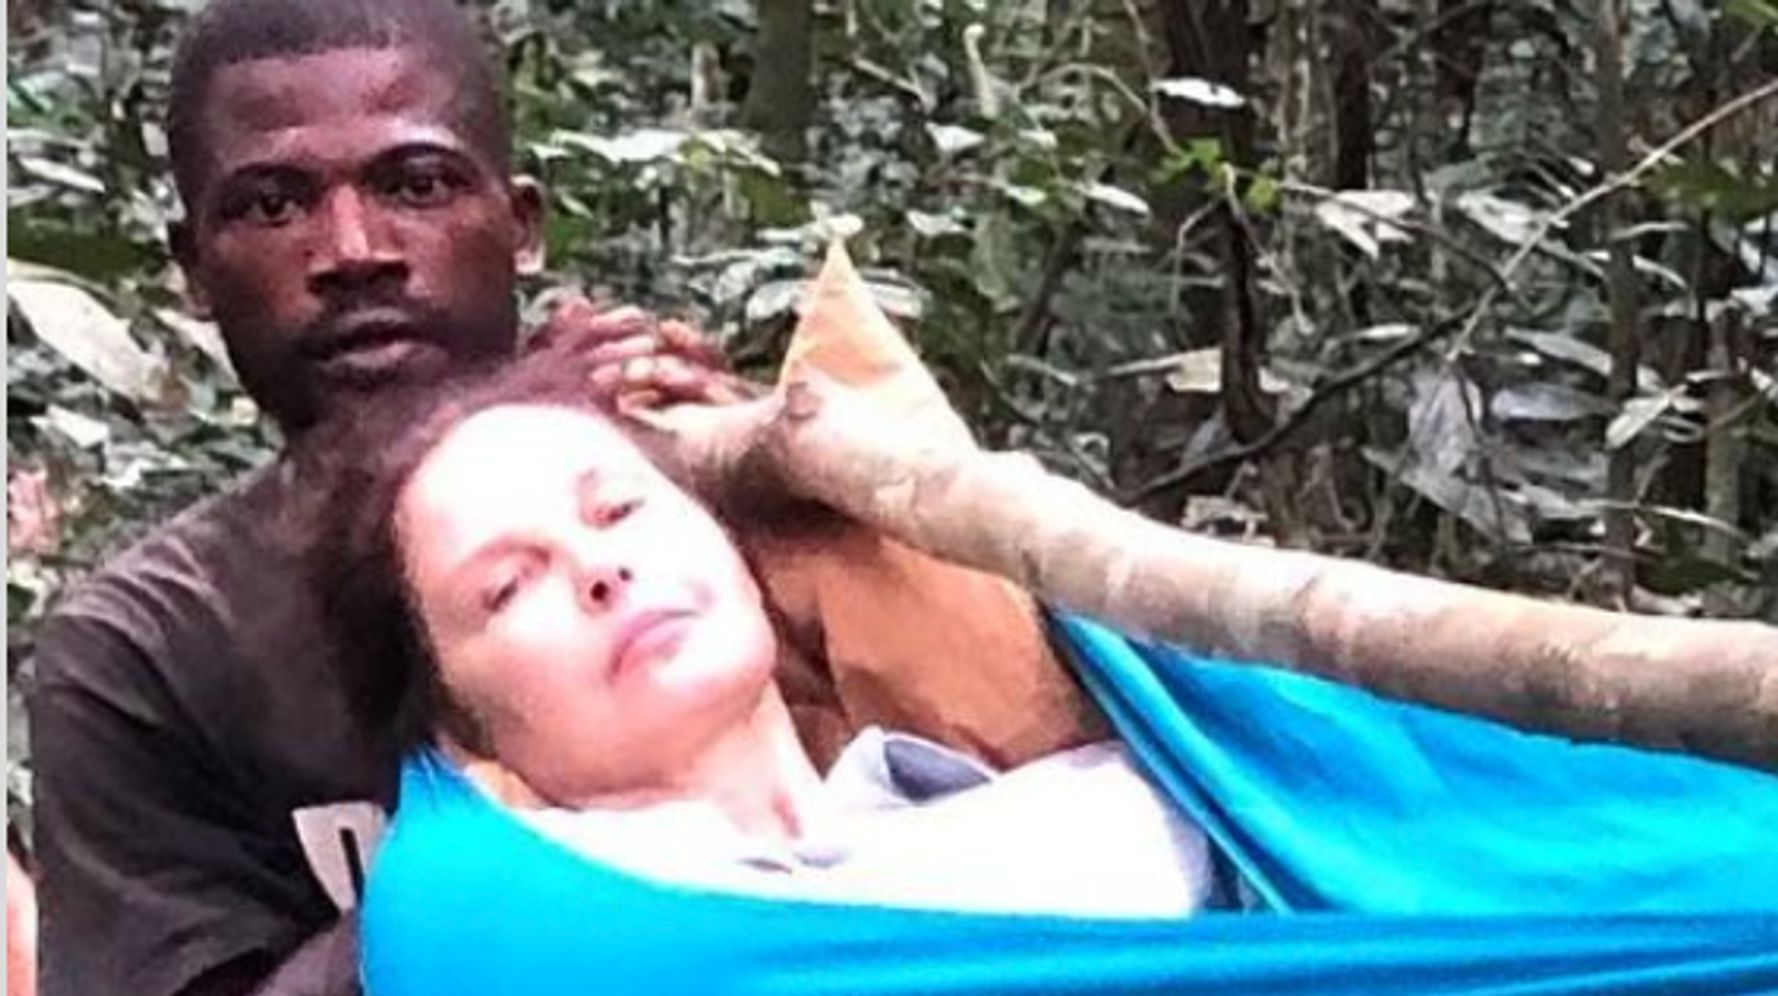 Ashley Judd’s photos of her heavy rescue in Congo highlight the heroes